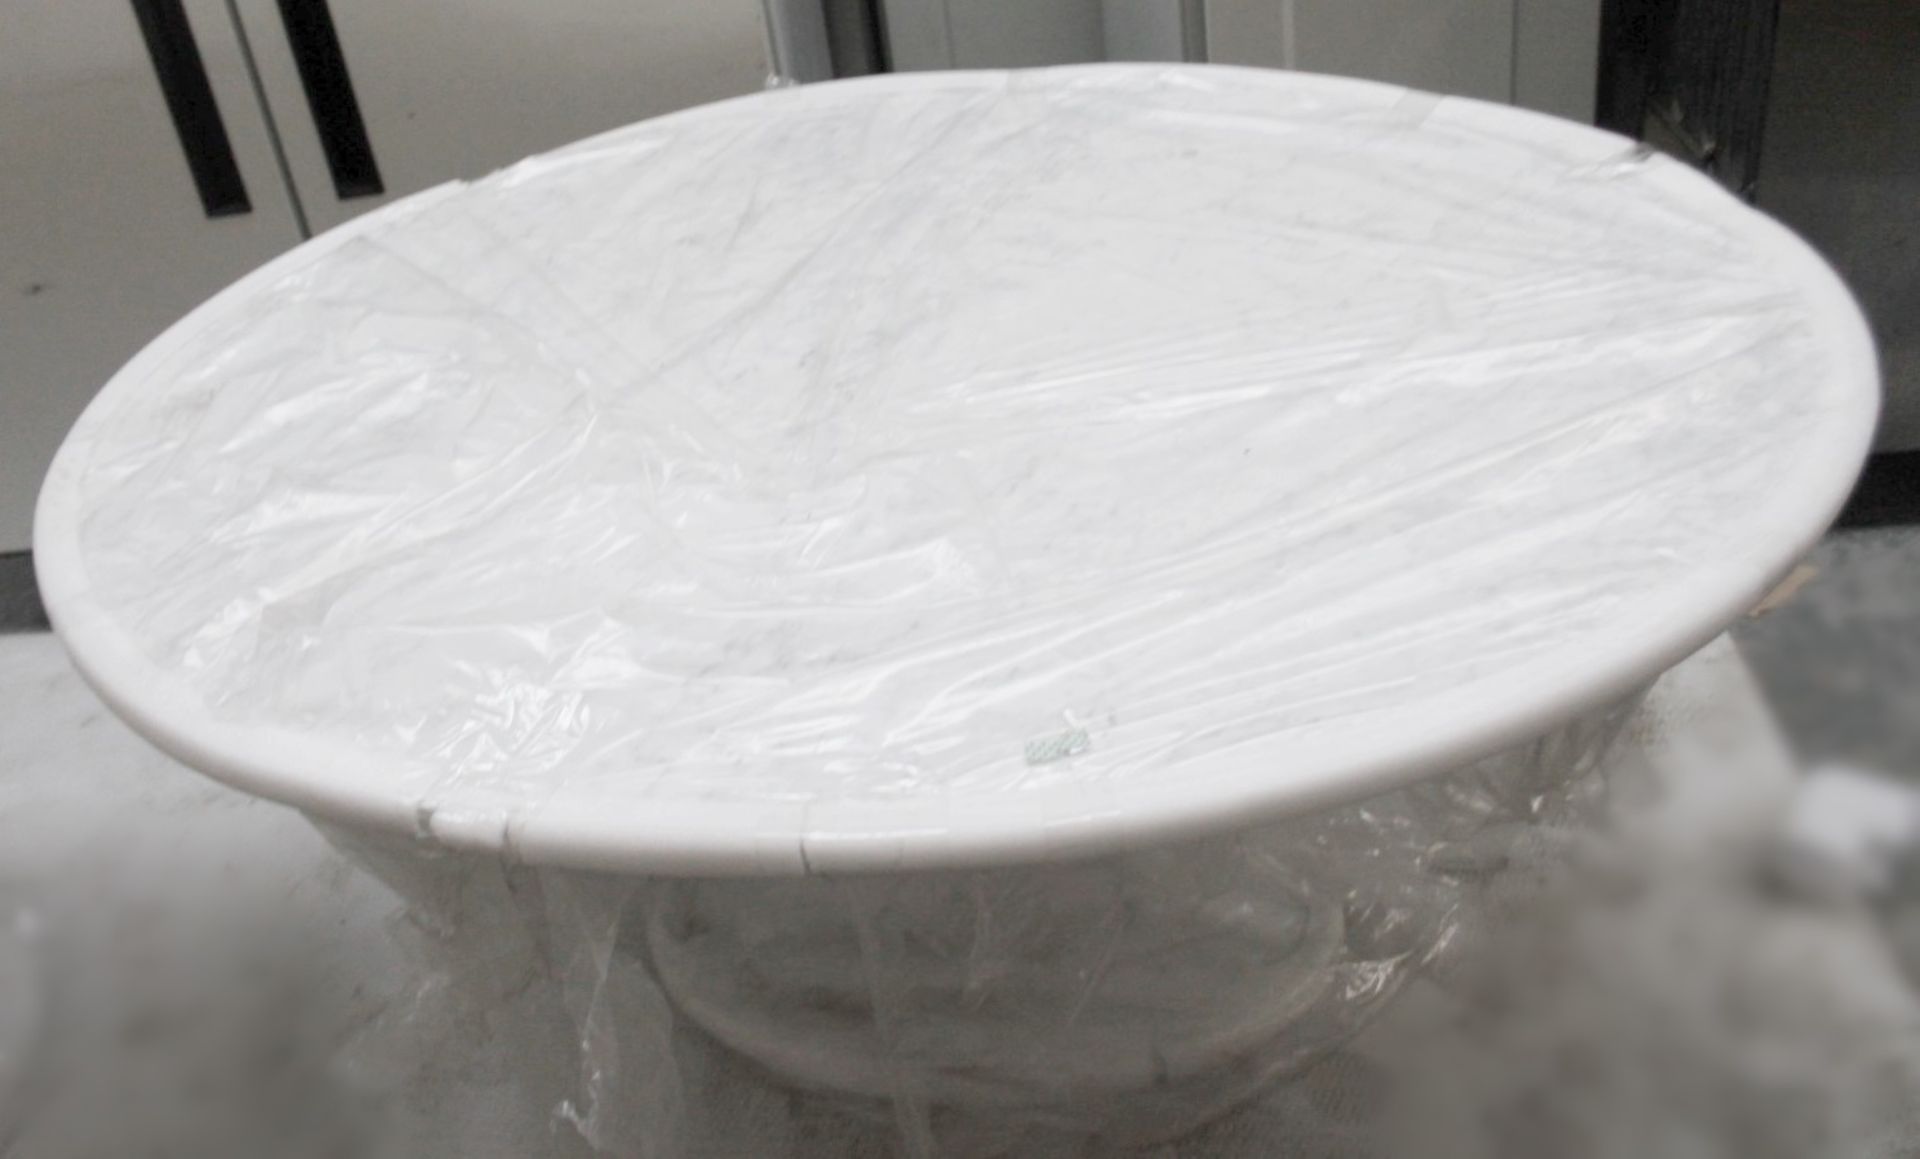 1 x Eero Saarinen Inspired Large Oval Carrara Marble-Topped Dining Table - H74cm x W150 x D120cm - Image 6 of 6